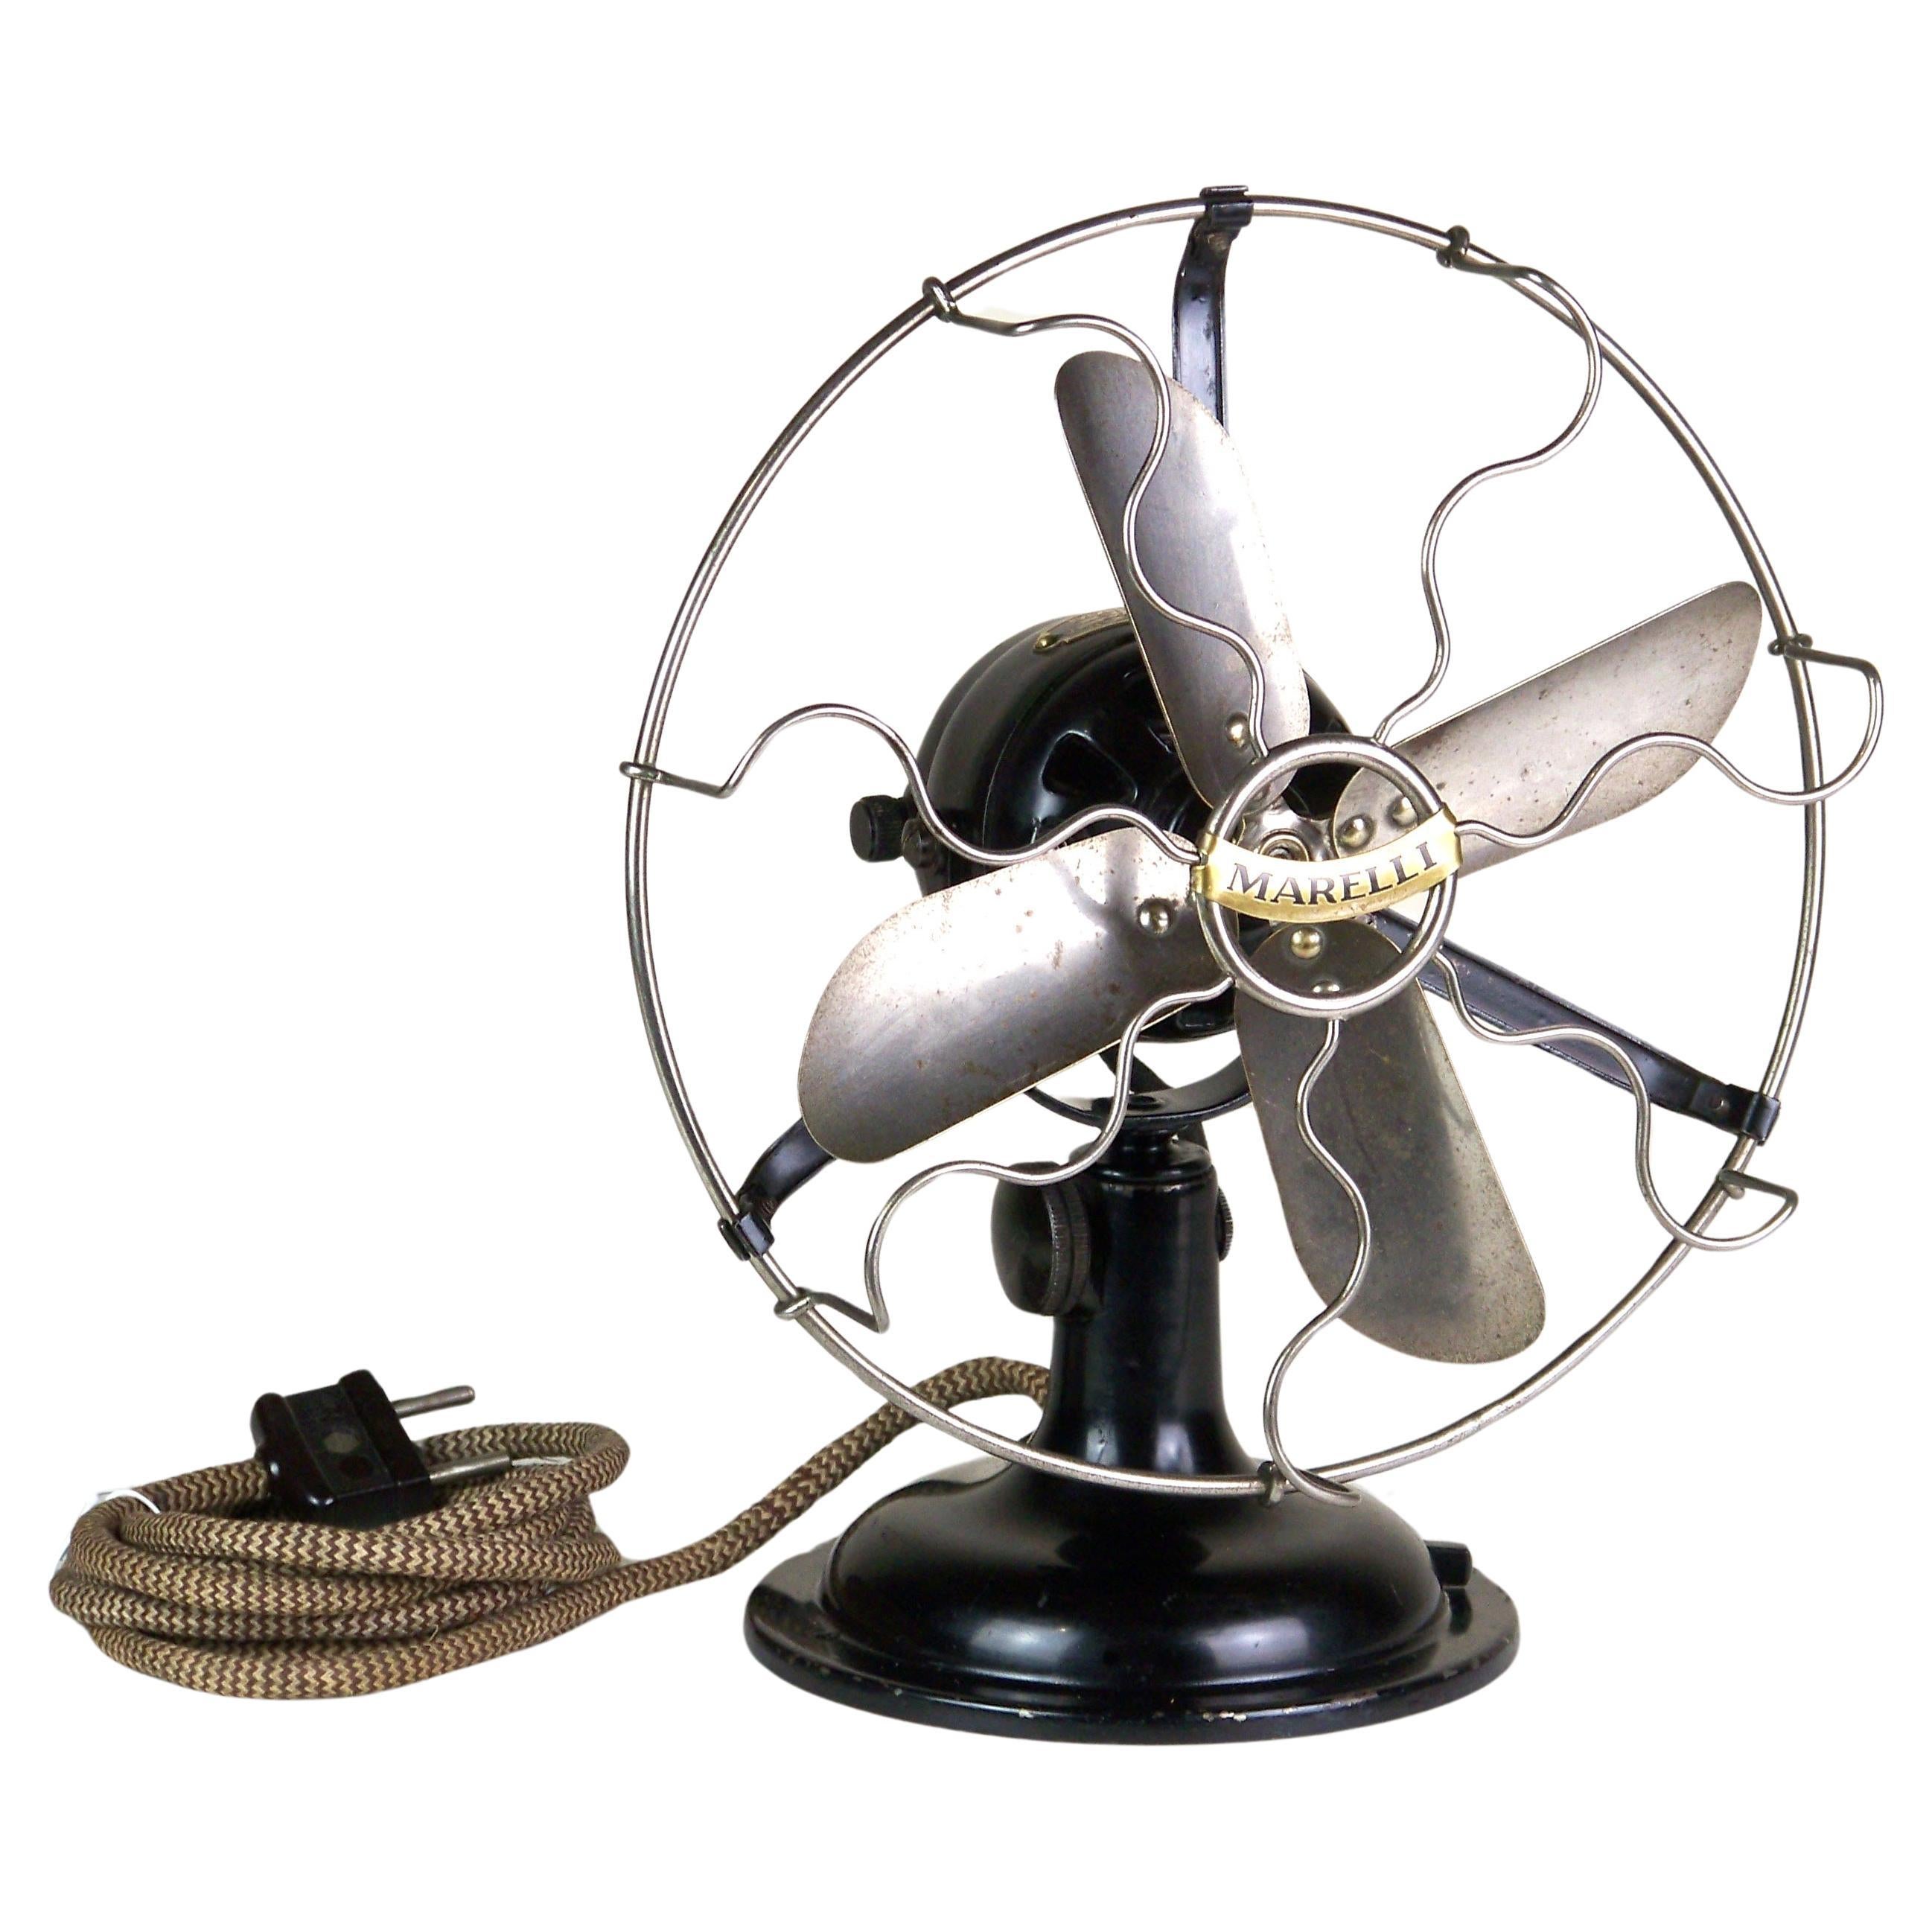 Table fan MARELLI, 220V - Italy, 1930s For Sale